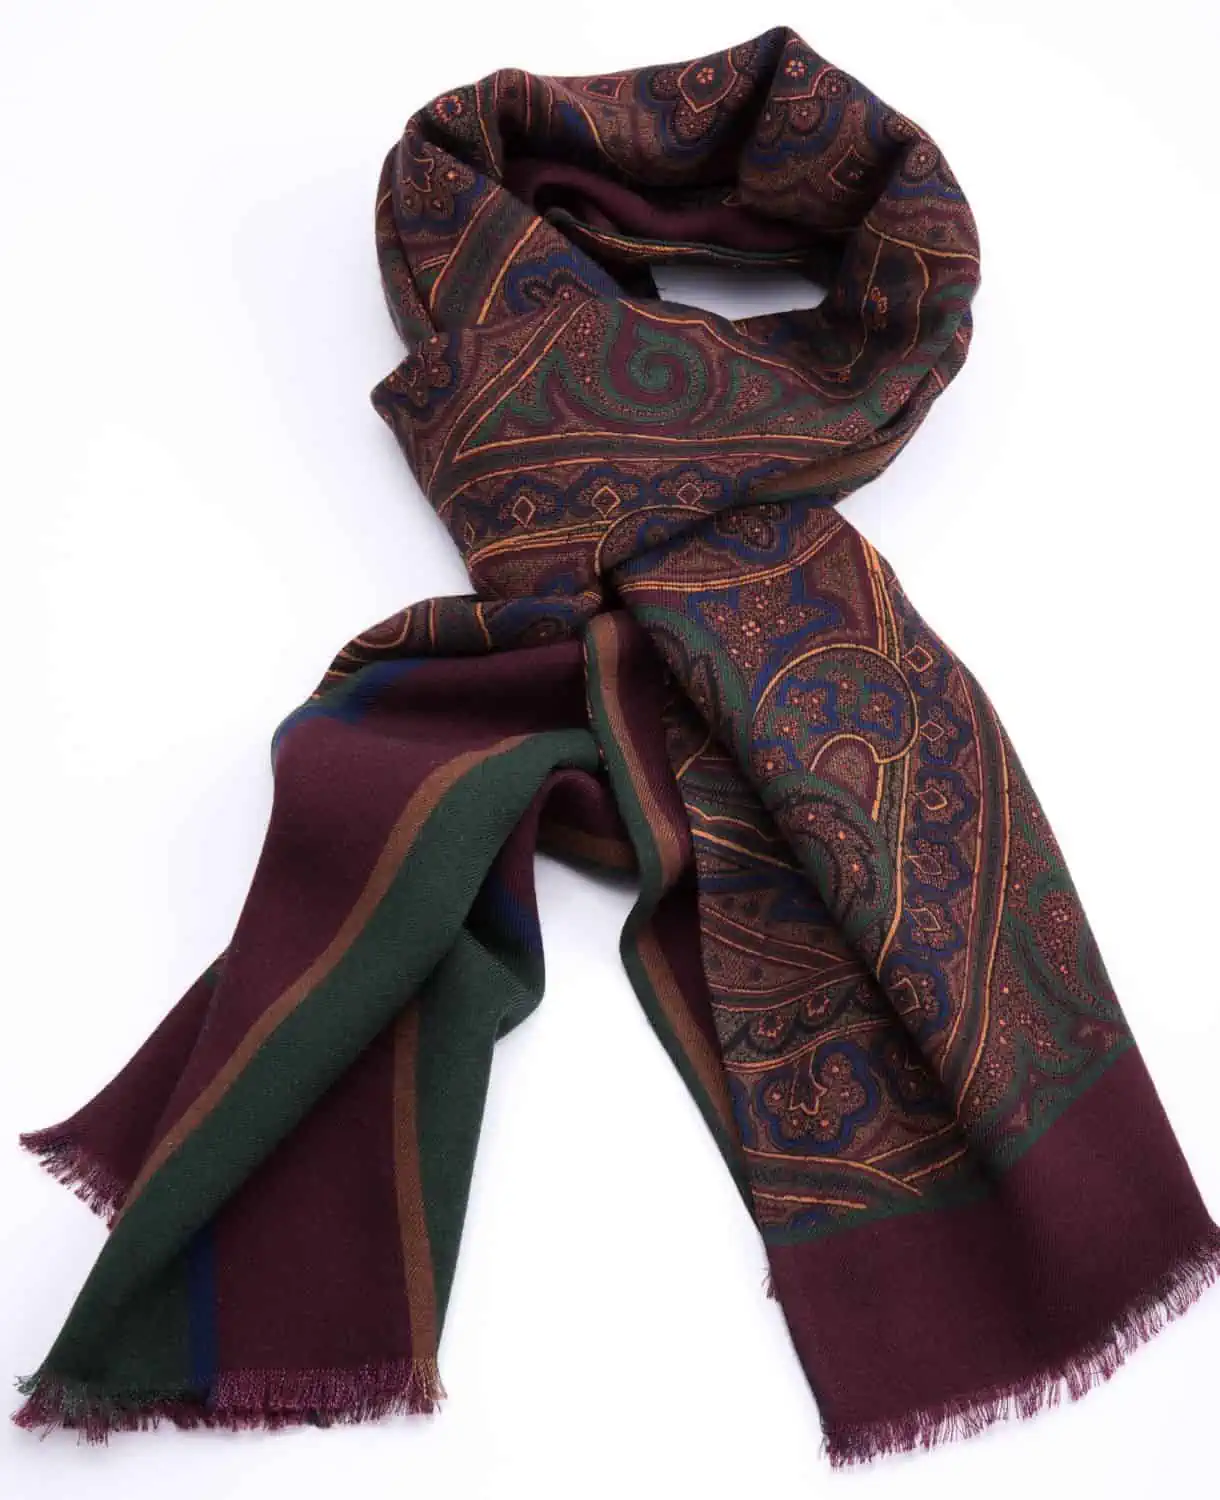 Reversible Scarf in Burgundy Red, Green and Yellow Silk Wool Paisley and Stripes